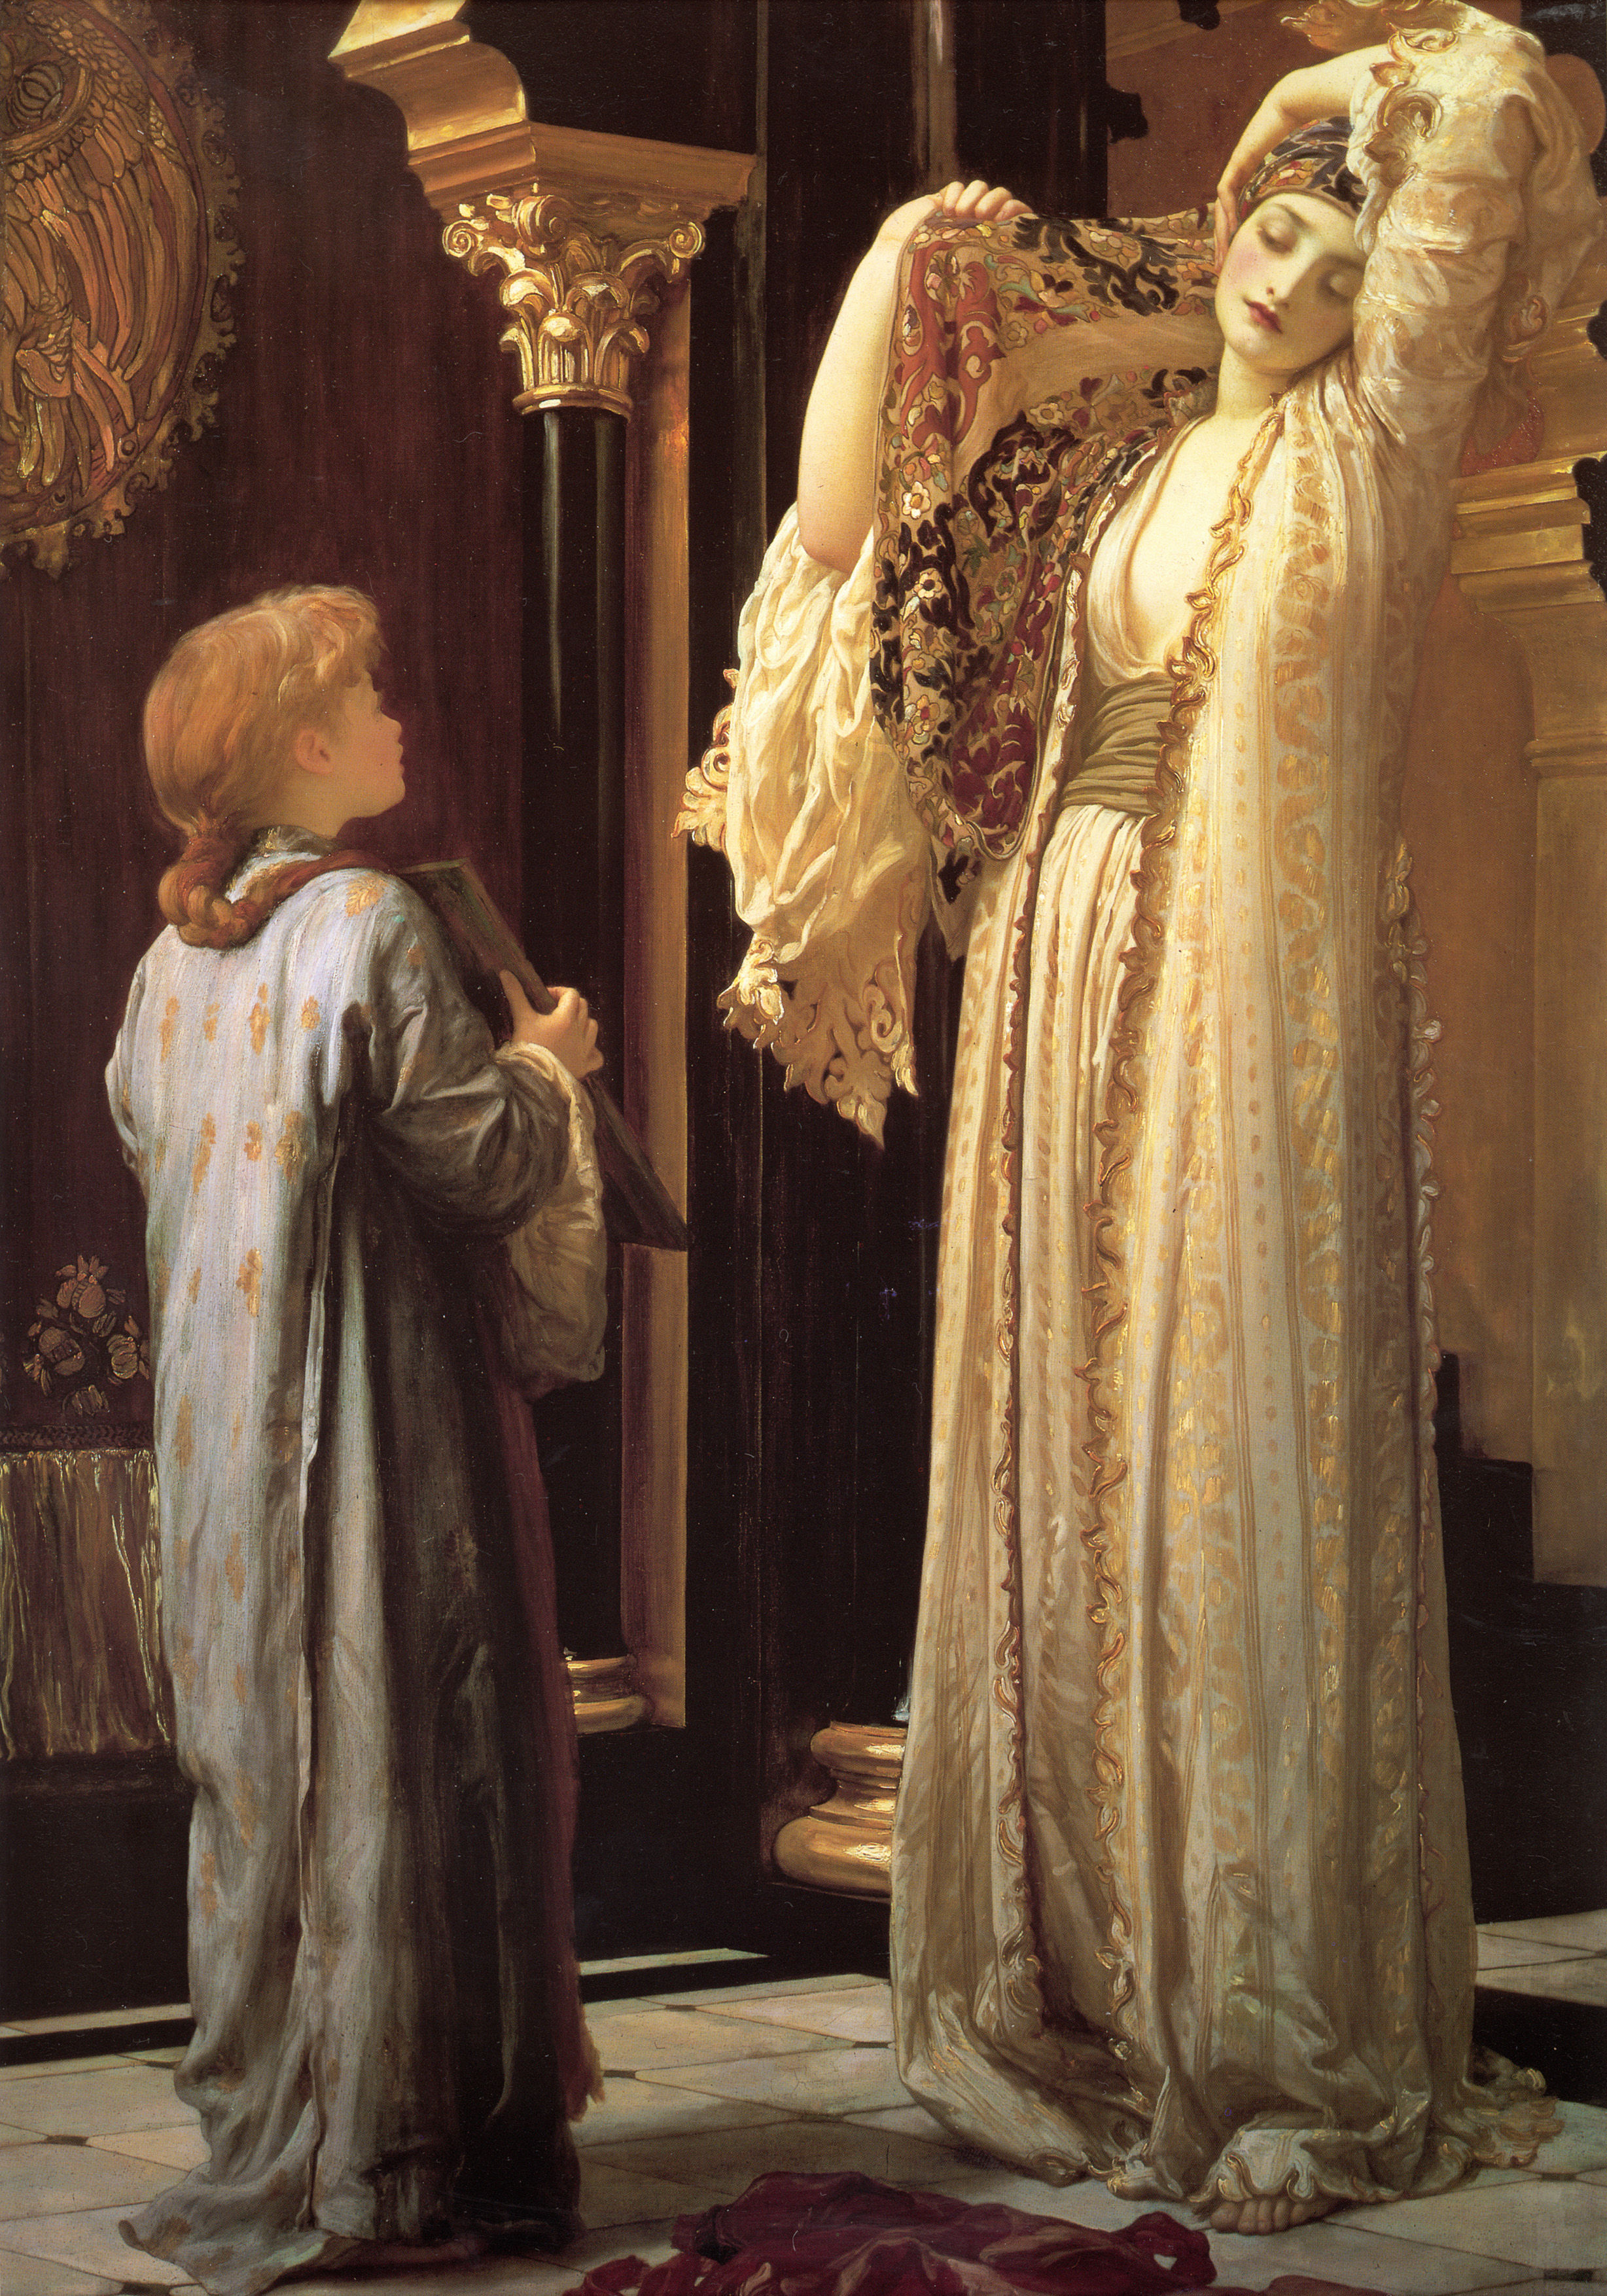 Light of the Harem by Lord Frederick Leighton